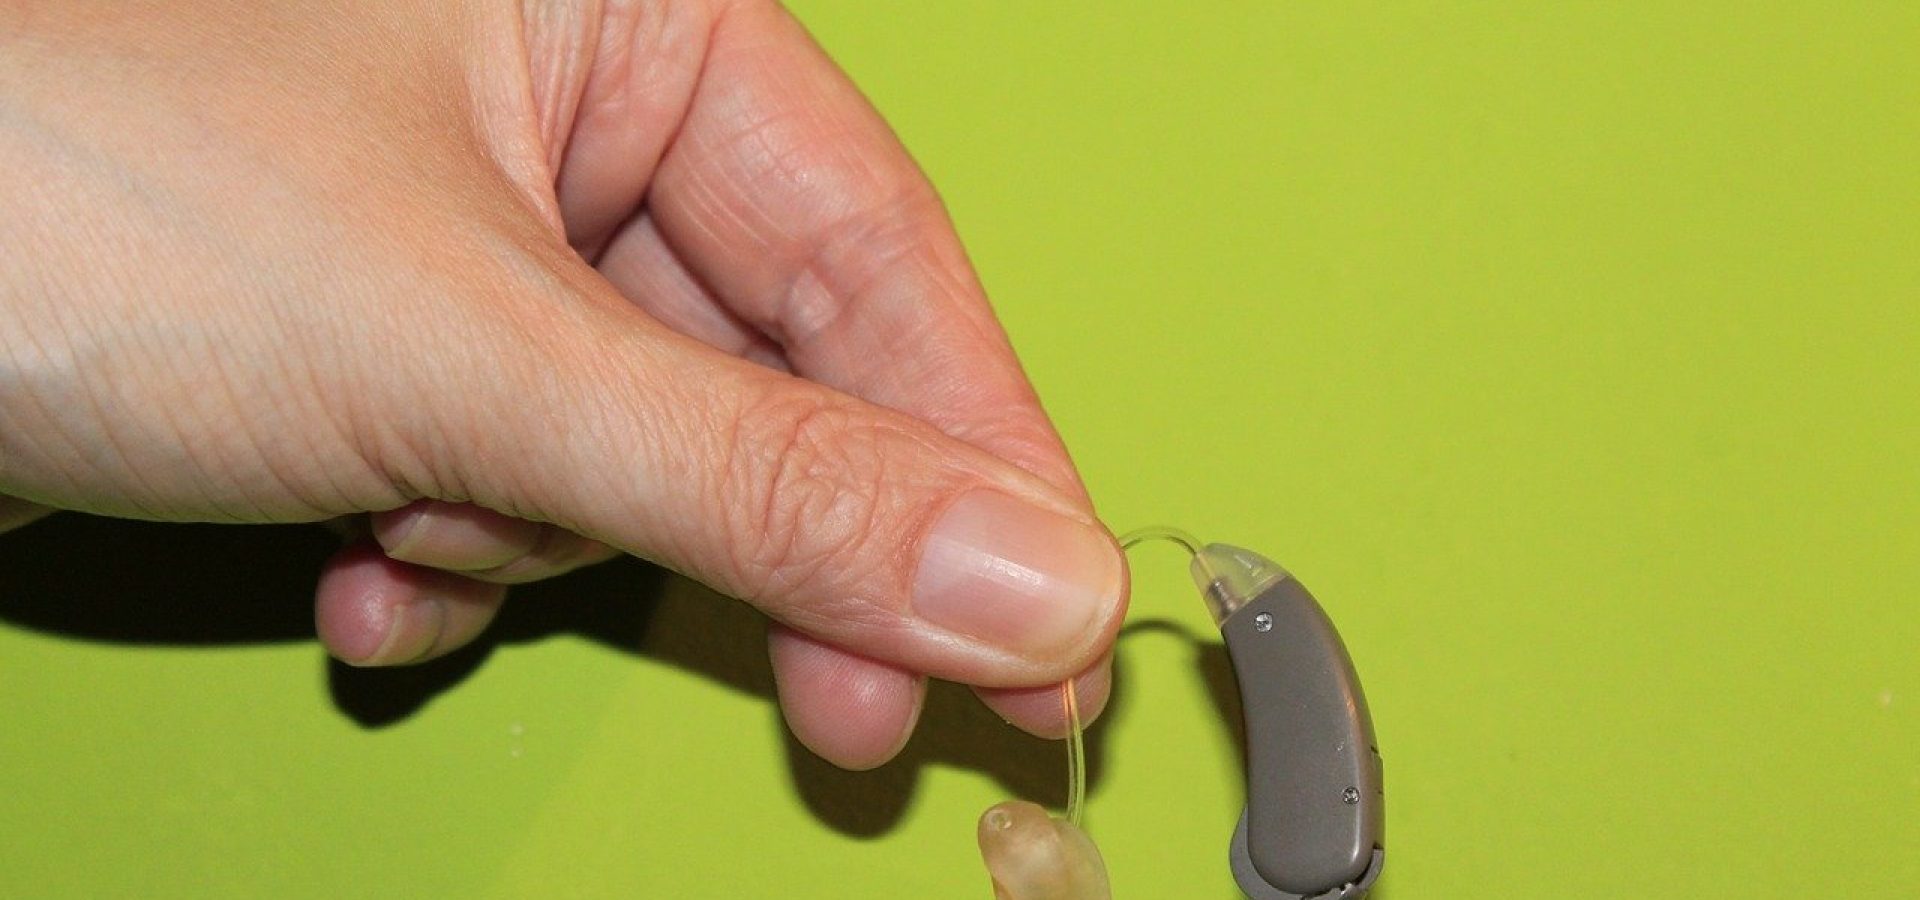 holding a hearing aid